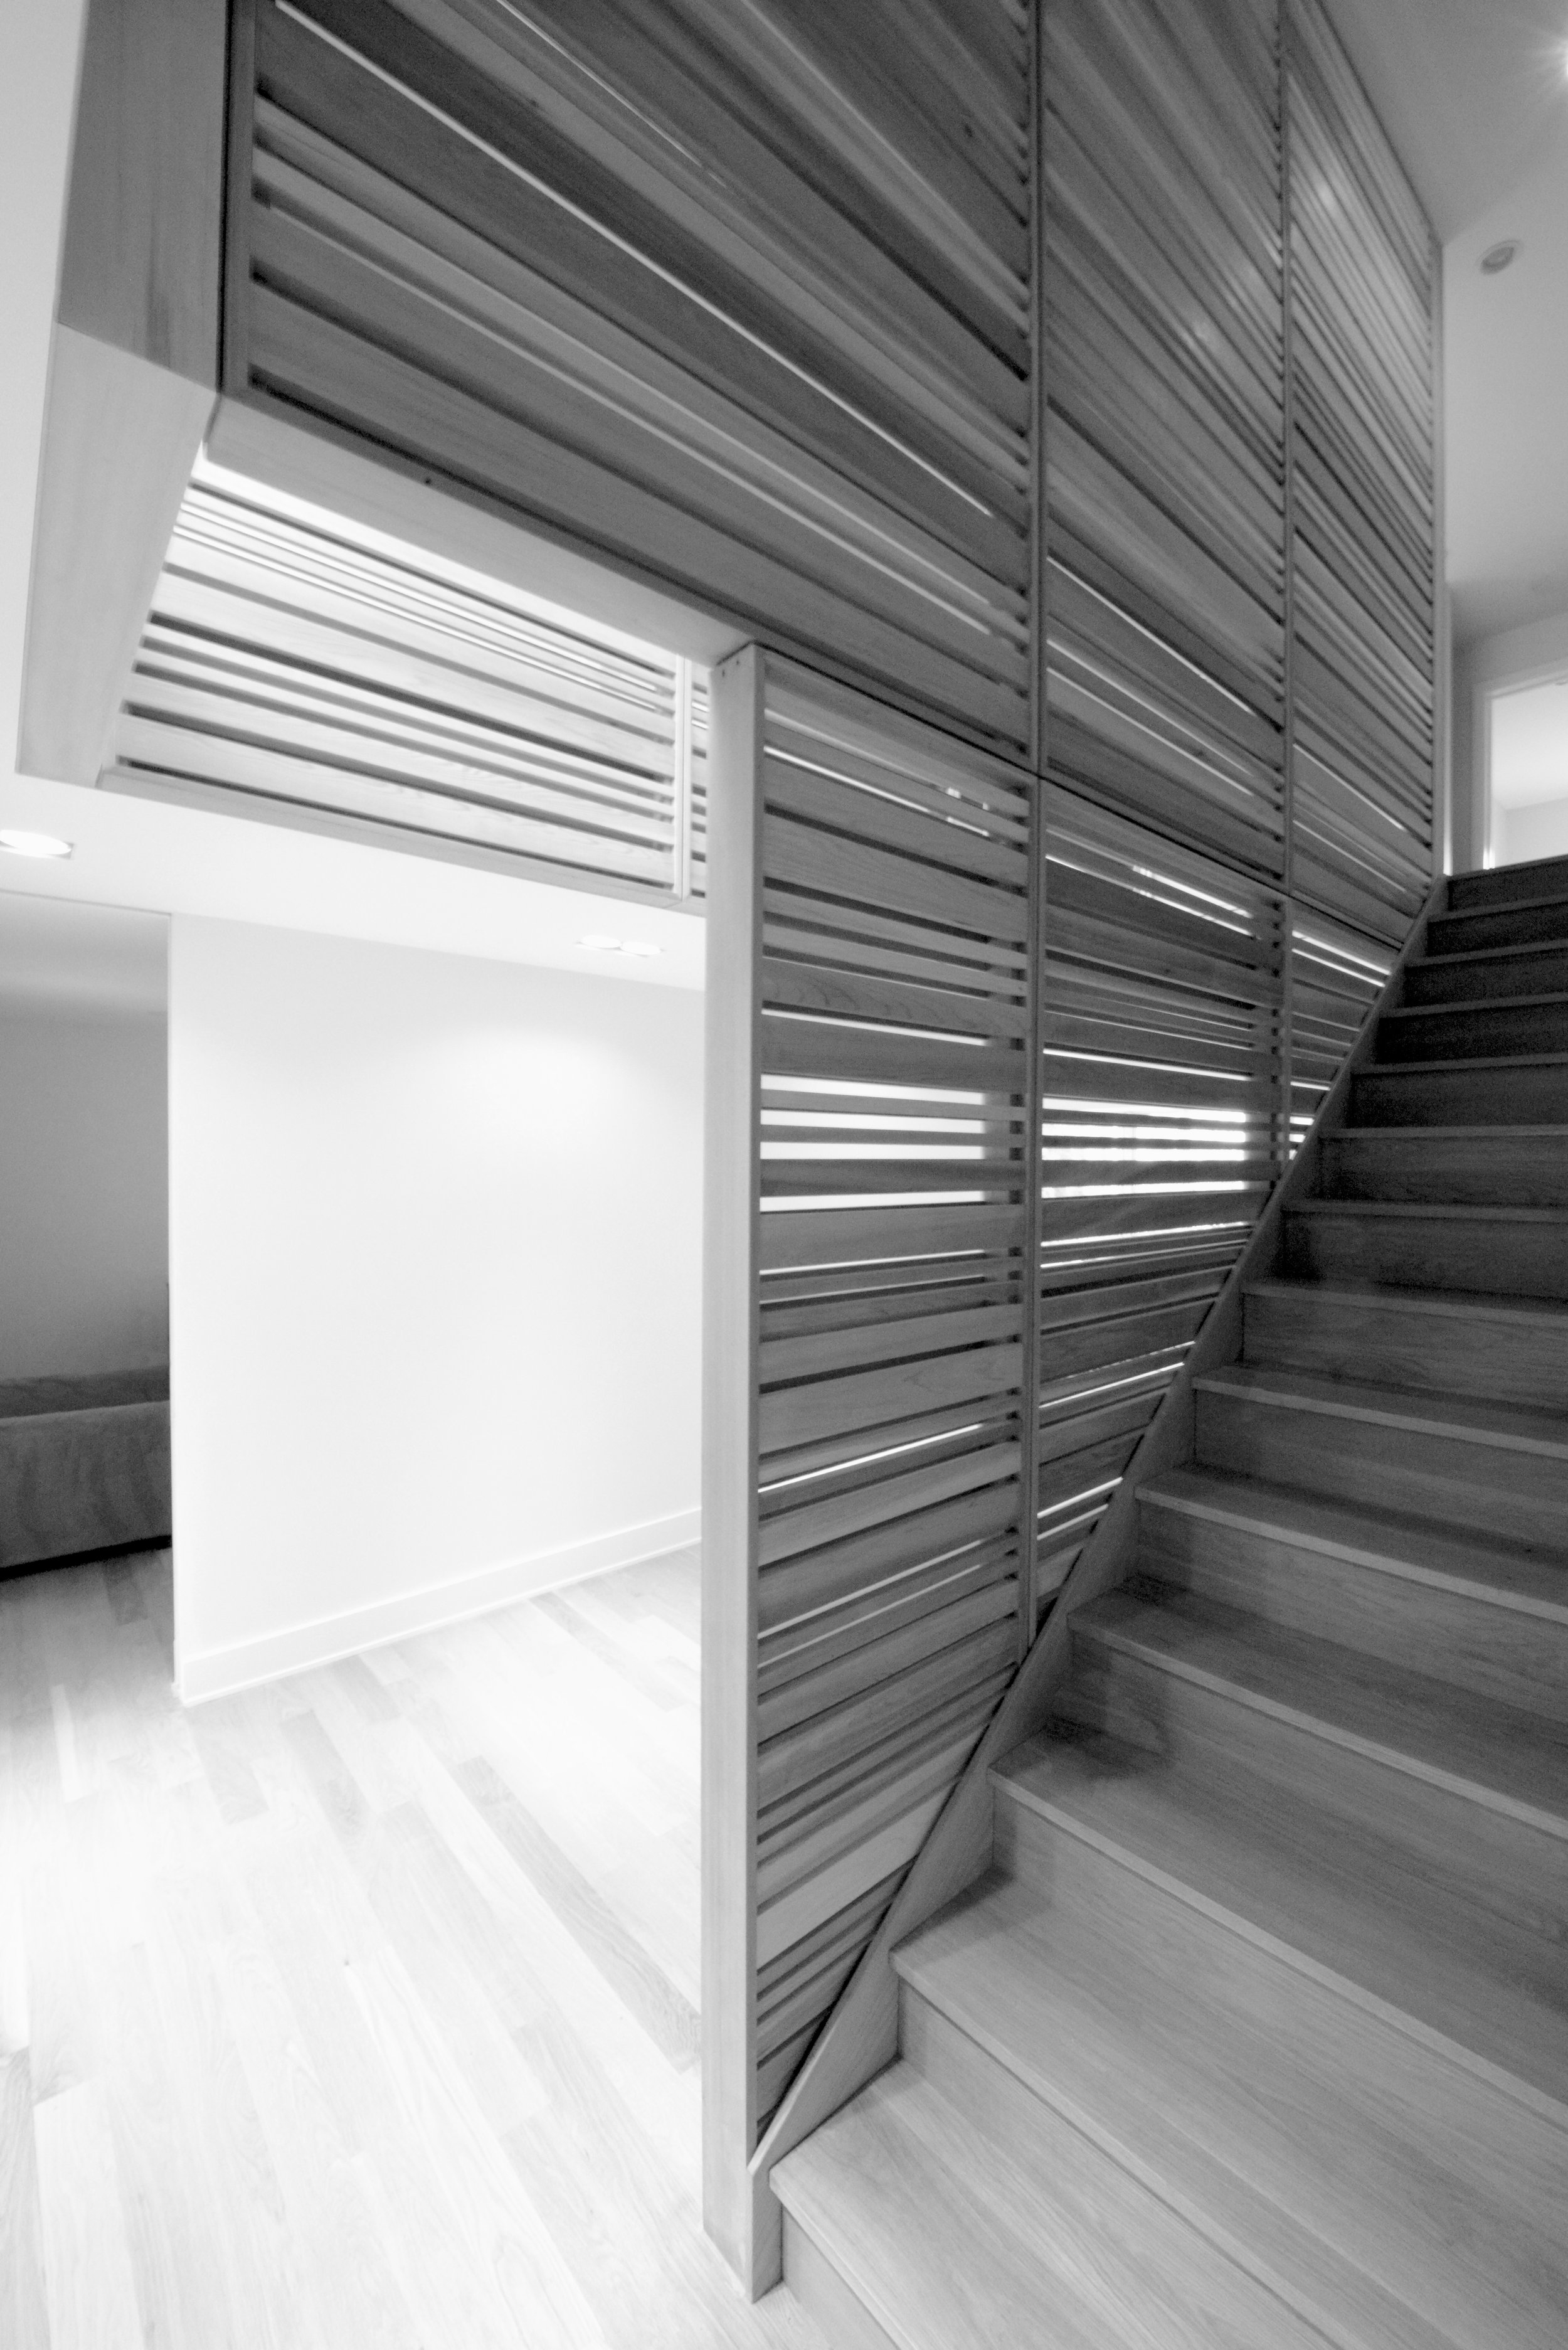 1 - LBox_entry-from-stair-bw.jpg